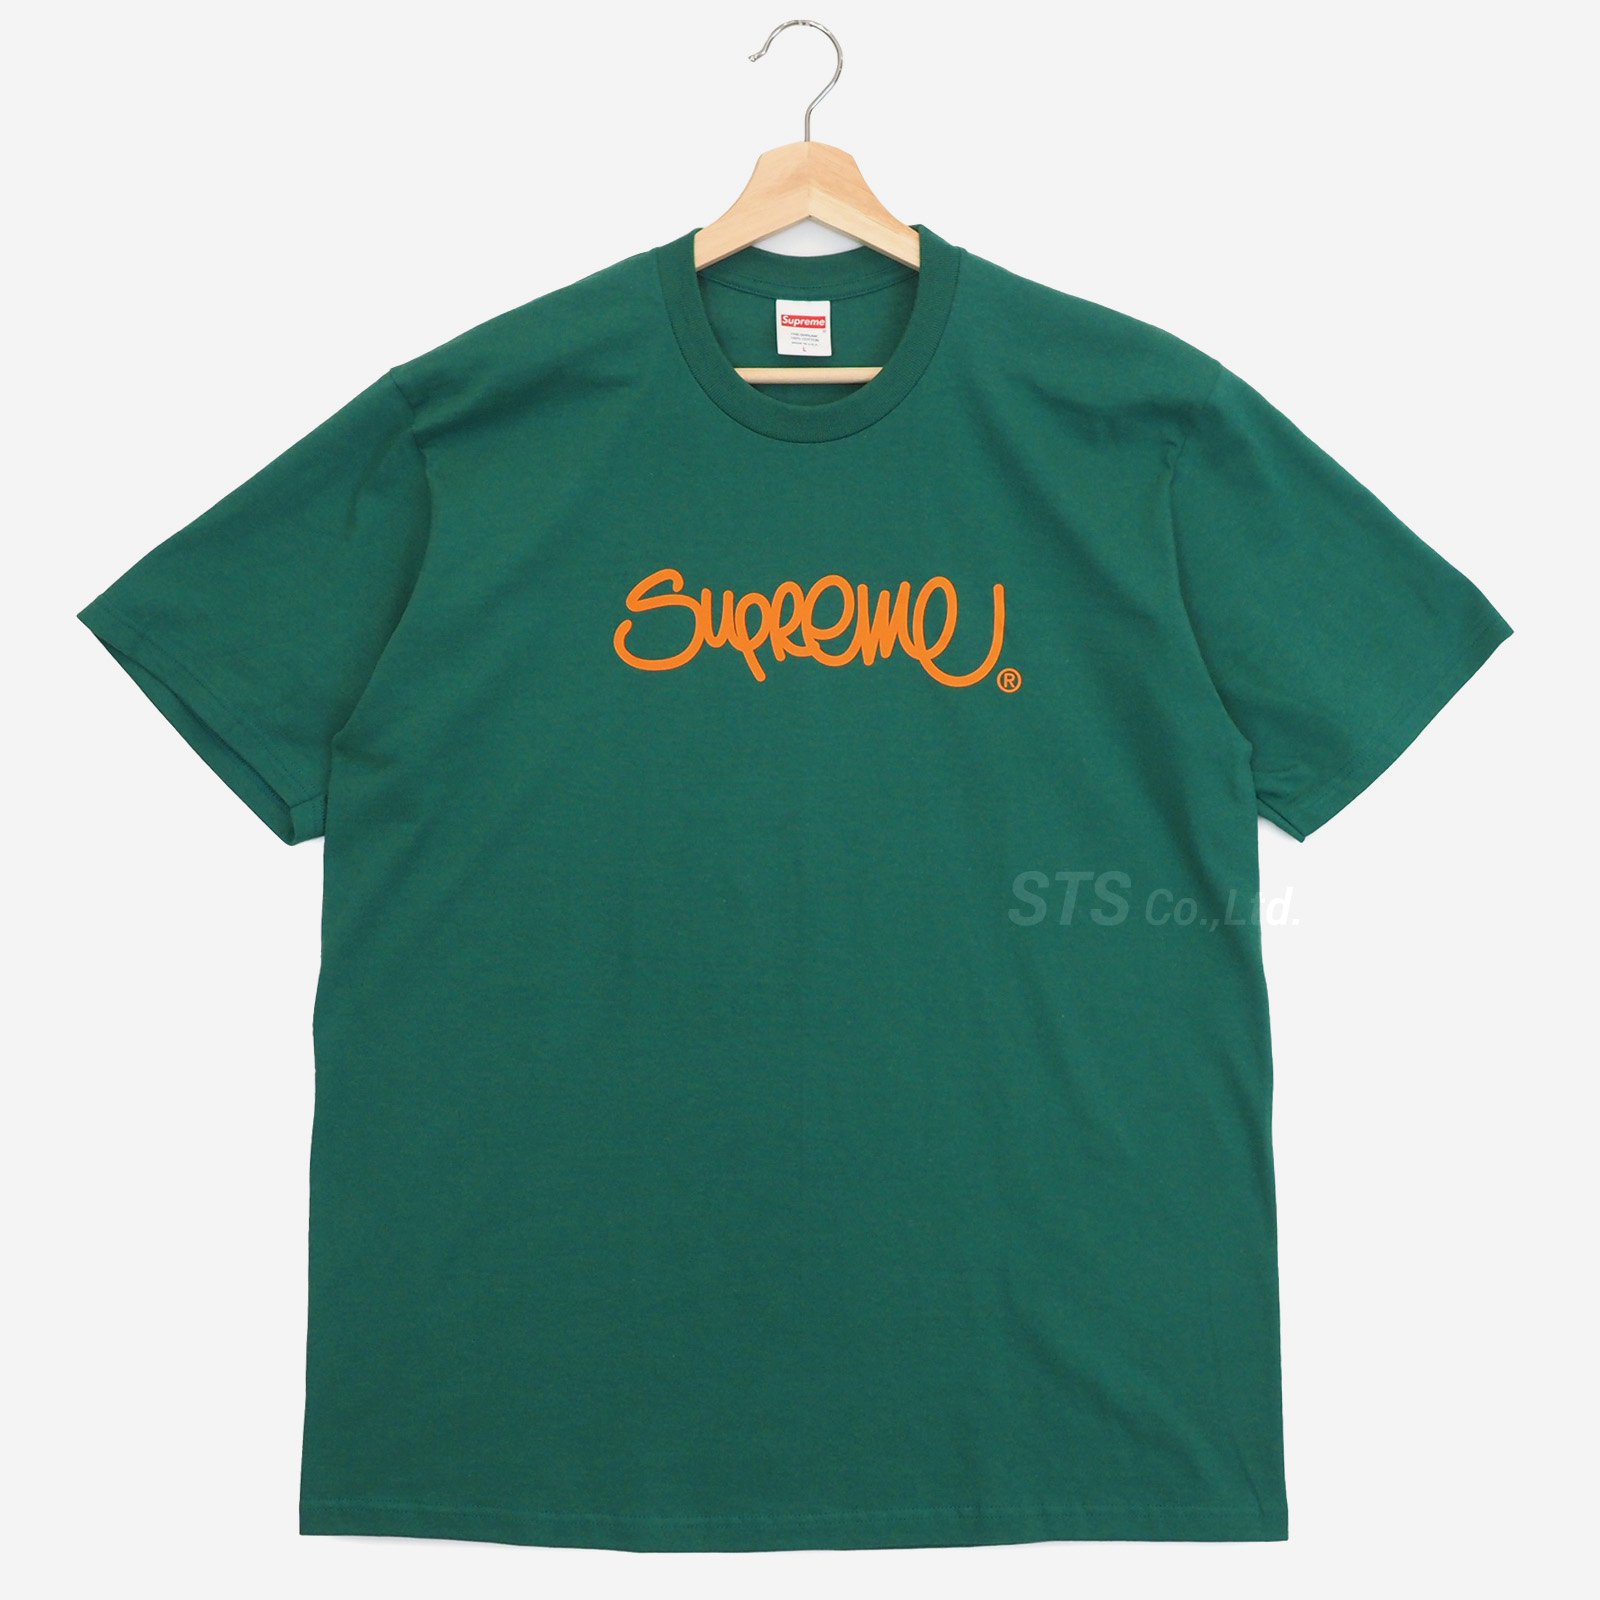 Supreme Handstyle Tee 白ホワイト白サイズ